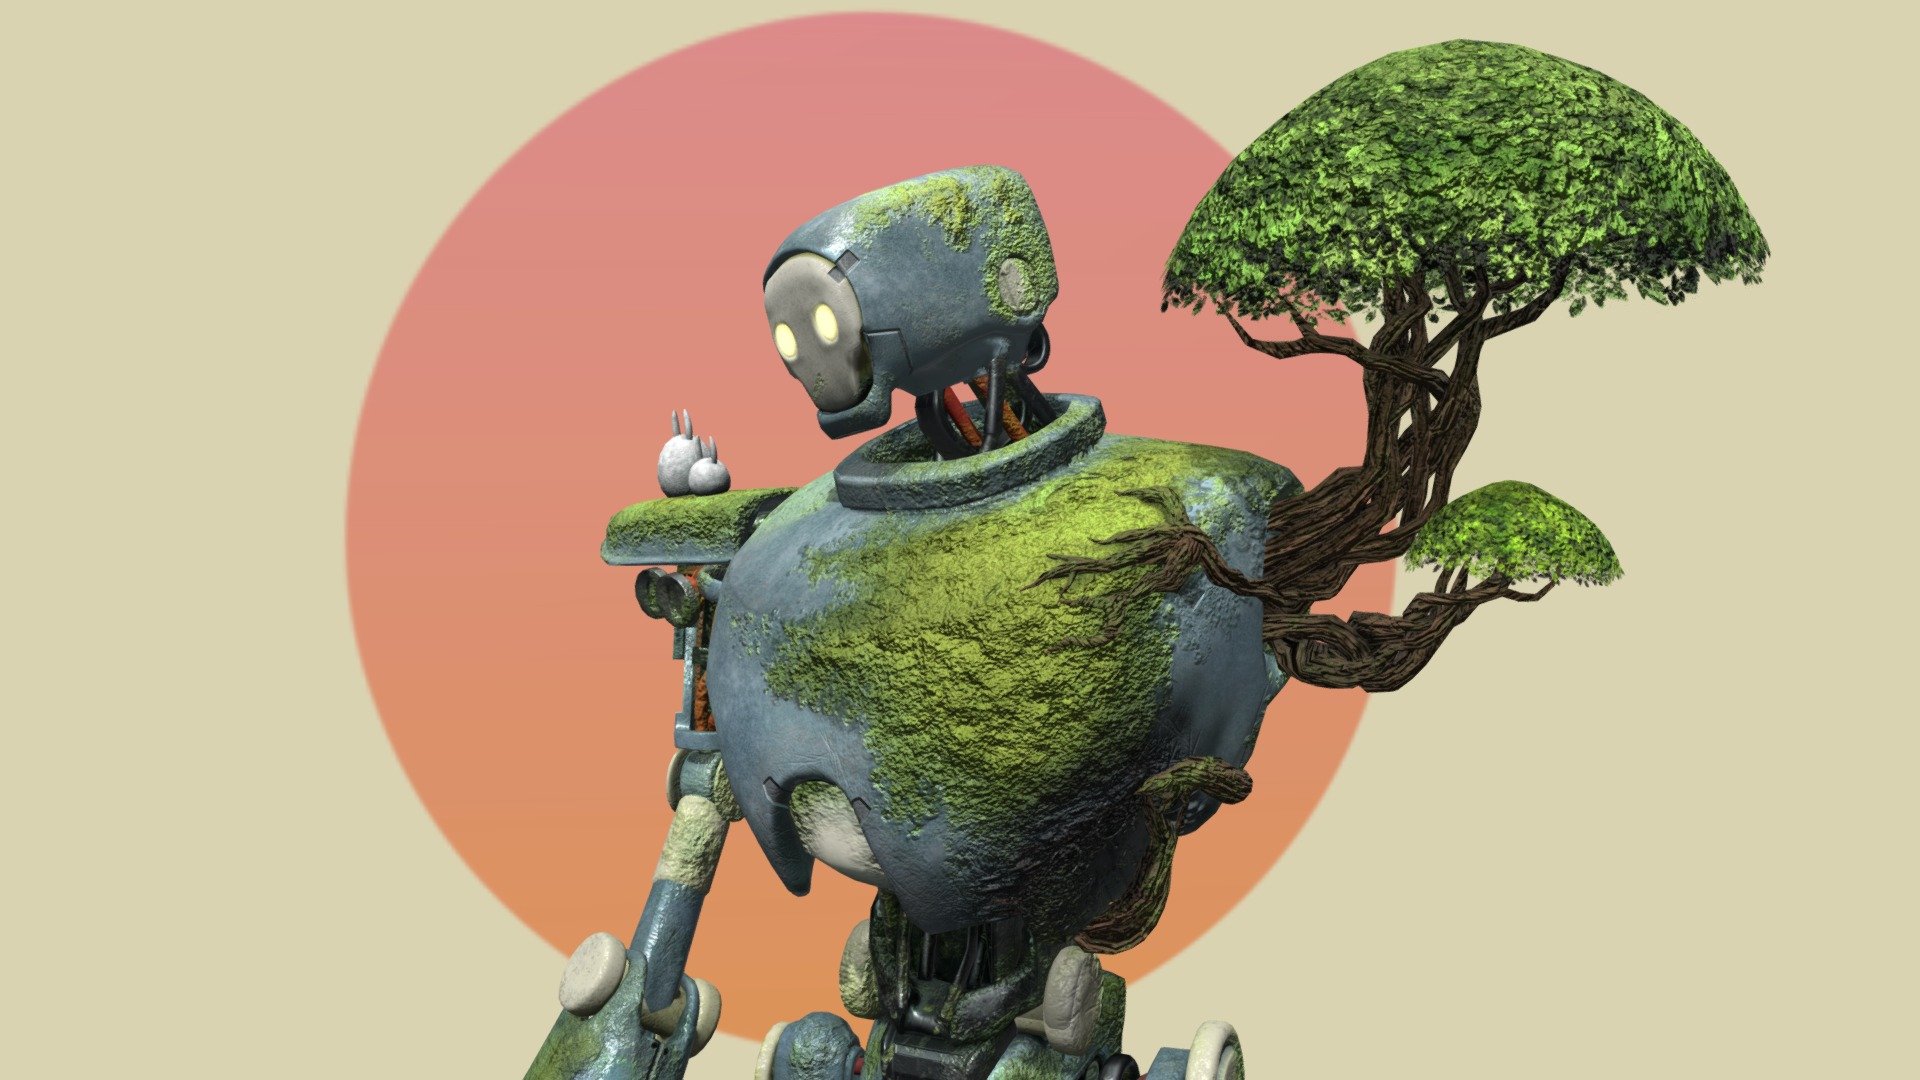 Forest Robot
A robot who has been lost for a while, has lost some parts along the way, but has also made new friends!

Concept by Ching Yeh on artstation!
www.artstation.com/chingyeh
www.artstation.com/artwork/gygWP - Forest Robot - 3D model by punkbunny 3d model